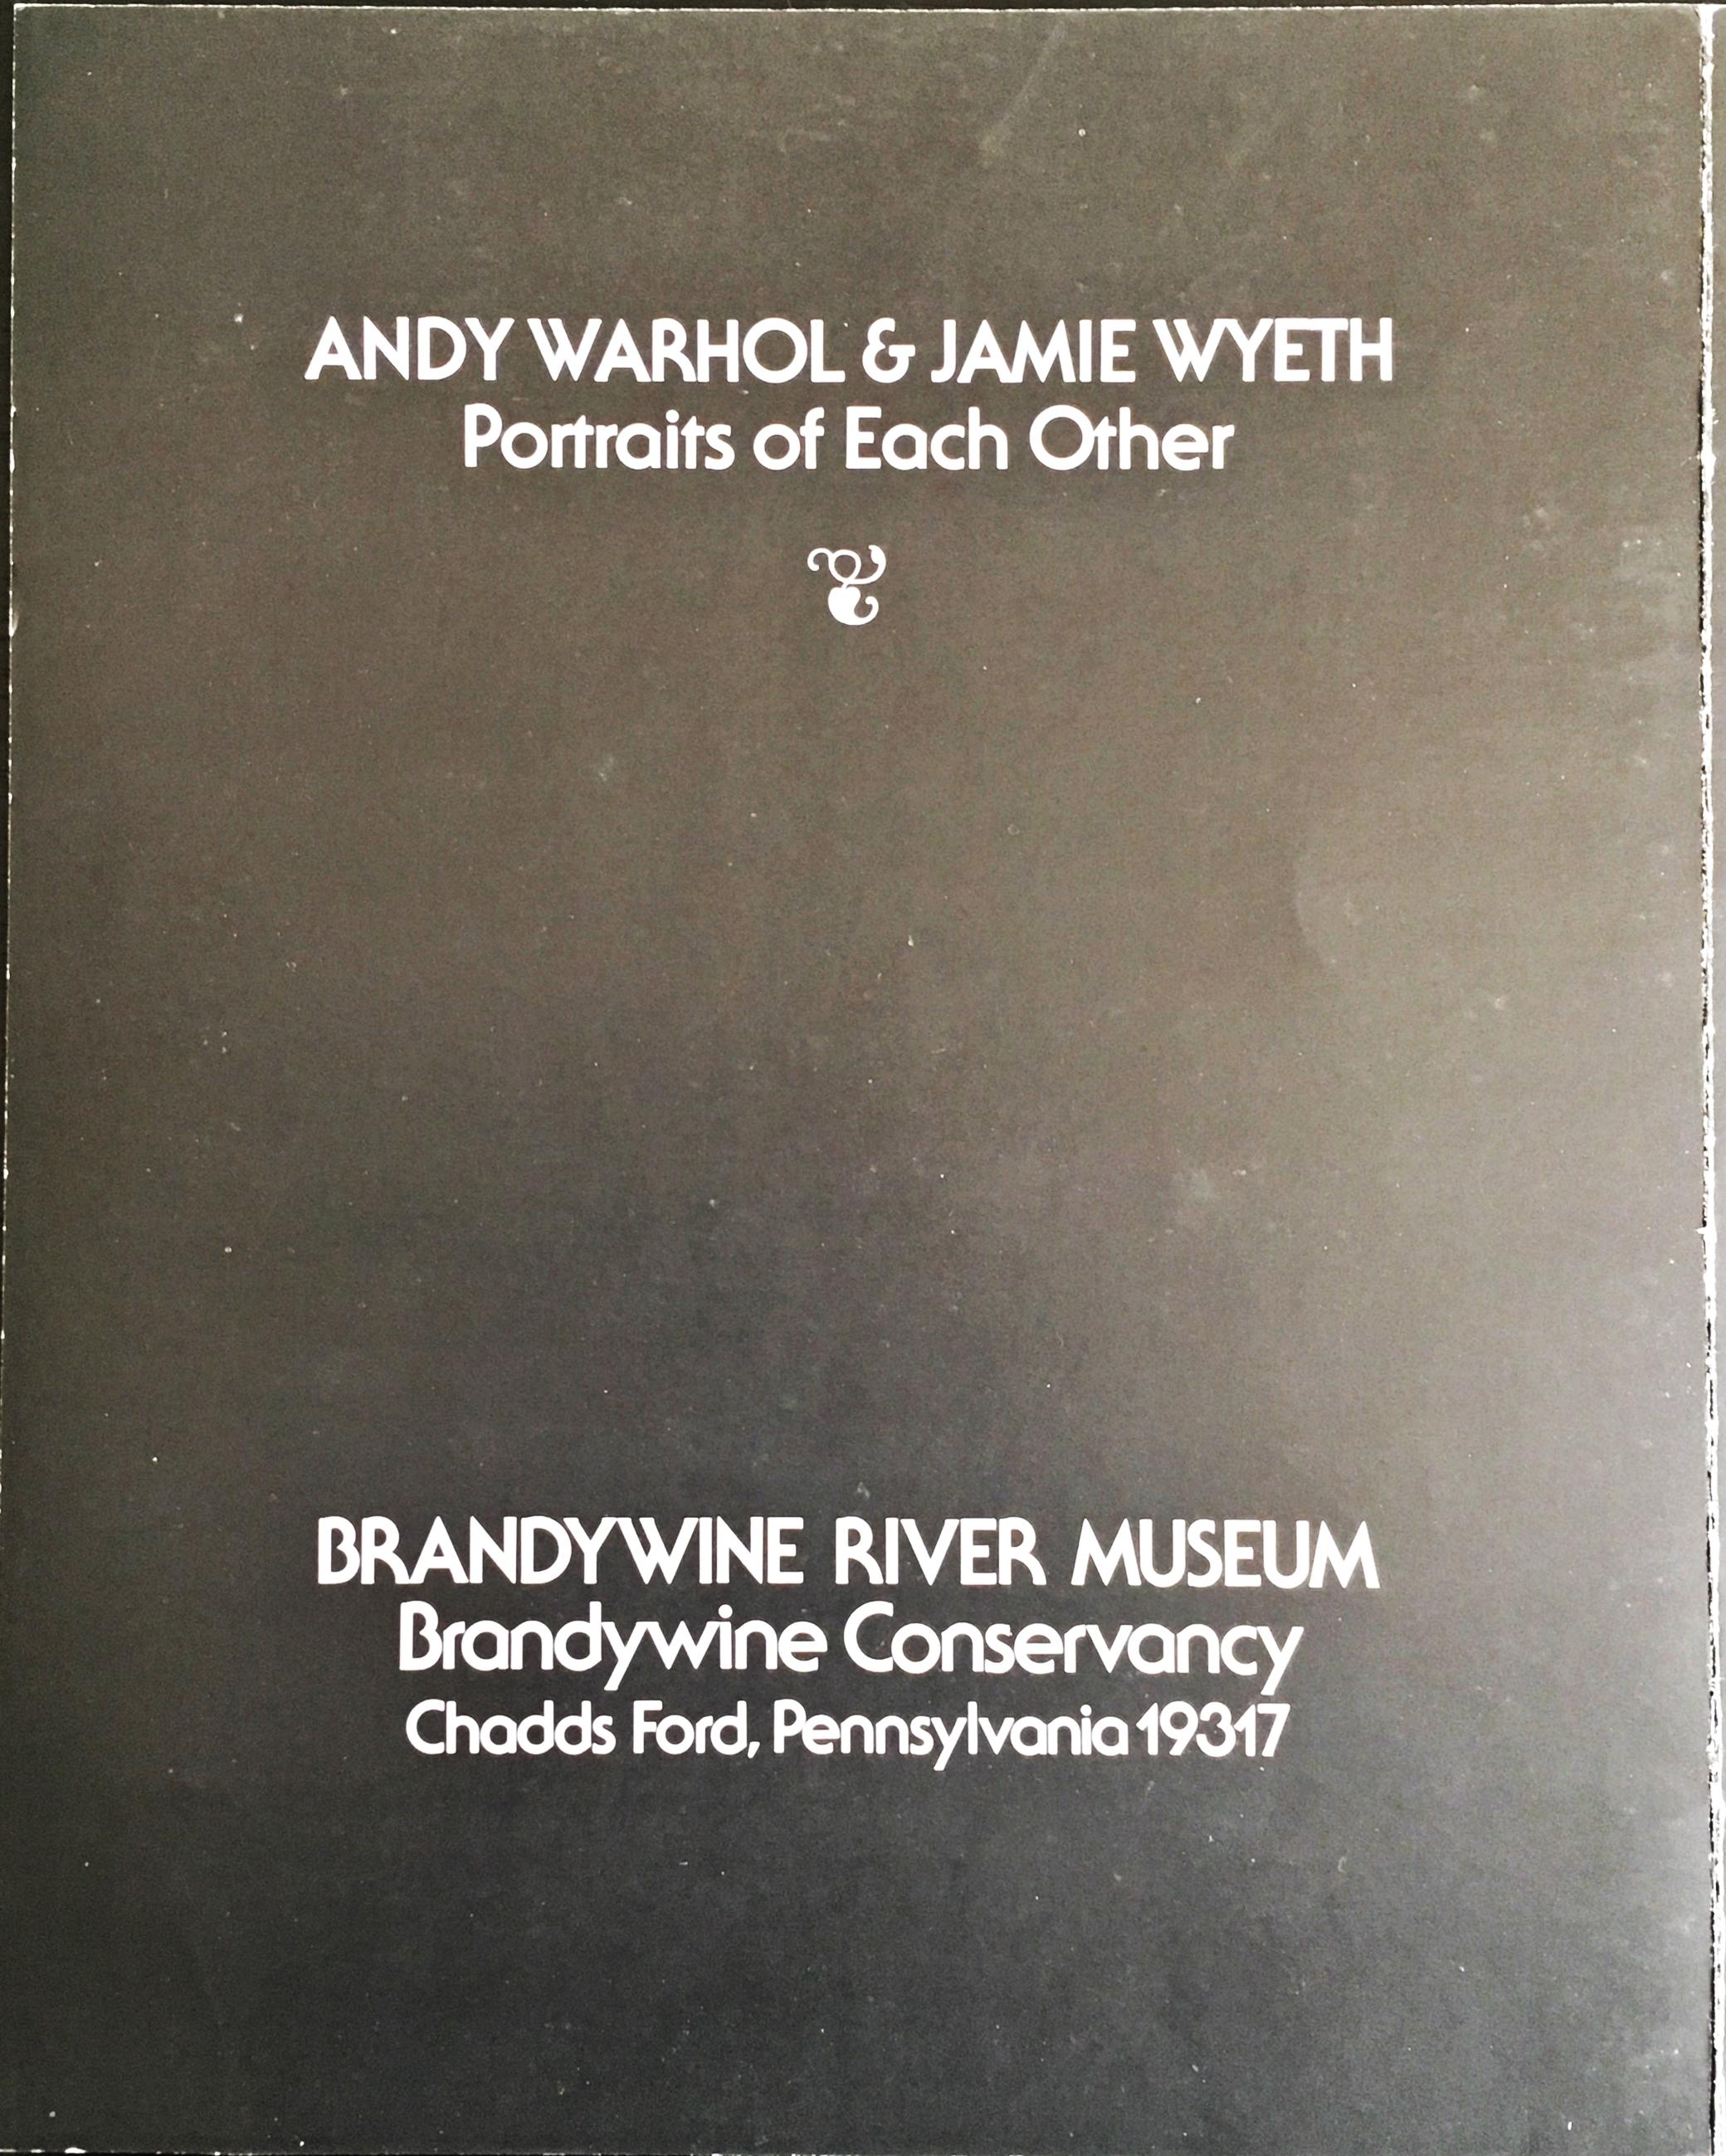 Andy Warhol, Jamie Wyeth
Andy Warhol & Jamie Wyeth: Portraits of Each Other (Hand Signed by both Wyeth & Warhol), 1976
Limited Edition Offset Lithograph
Signed in ink by Andy Warhol; signed a second time in initials by Warhol directly above. Signed